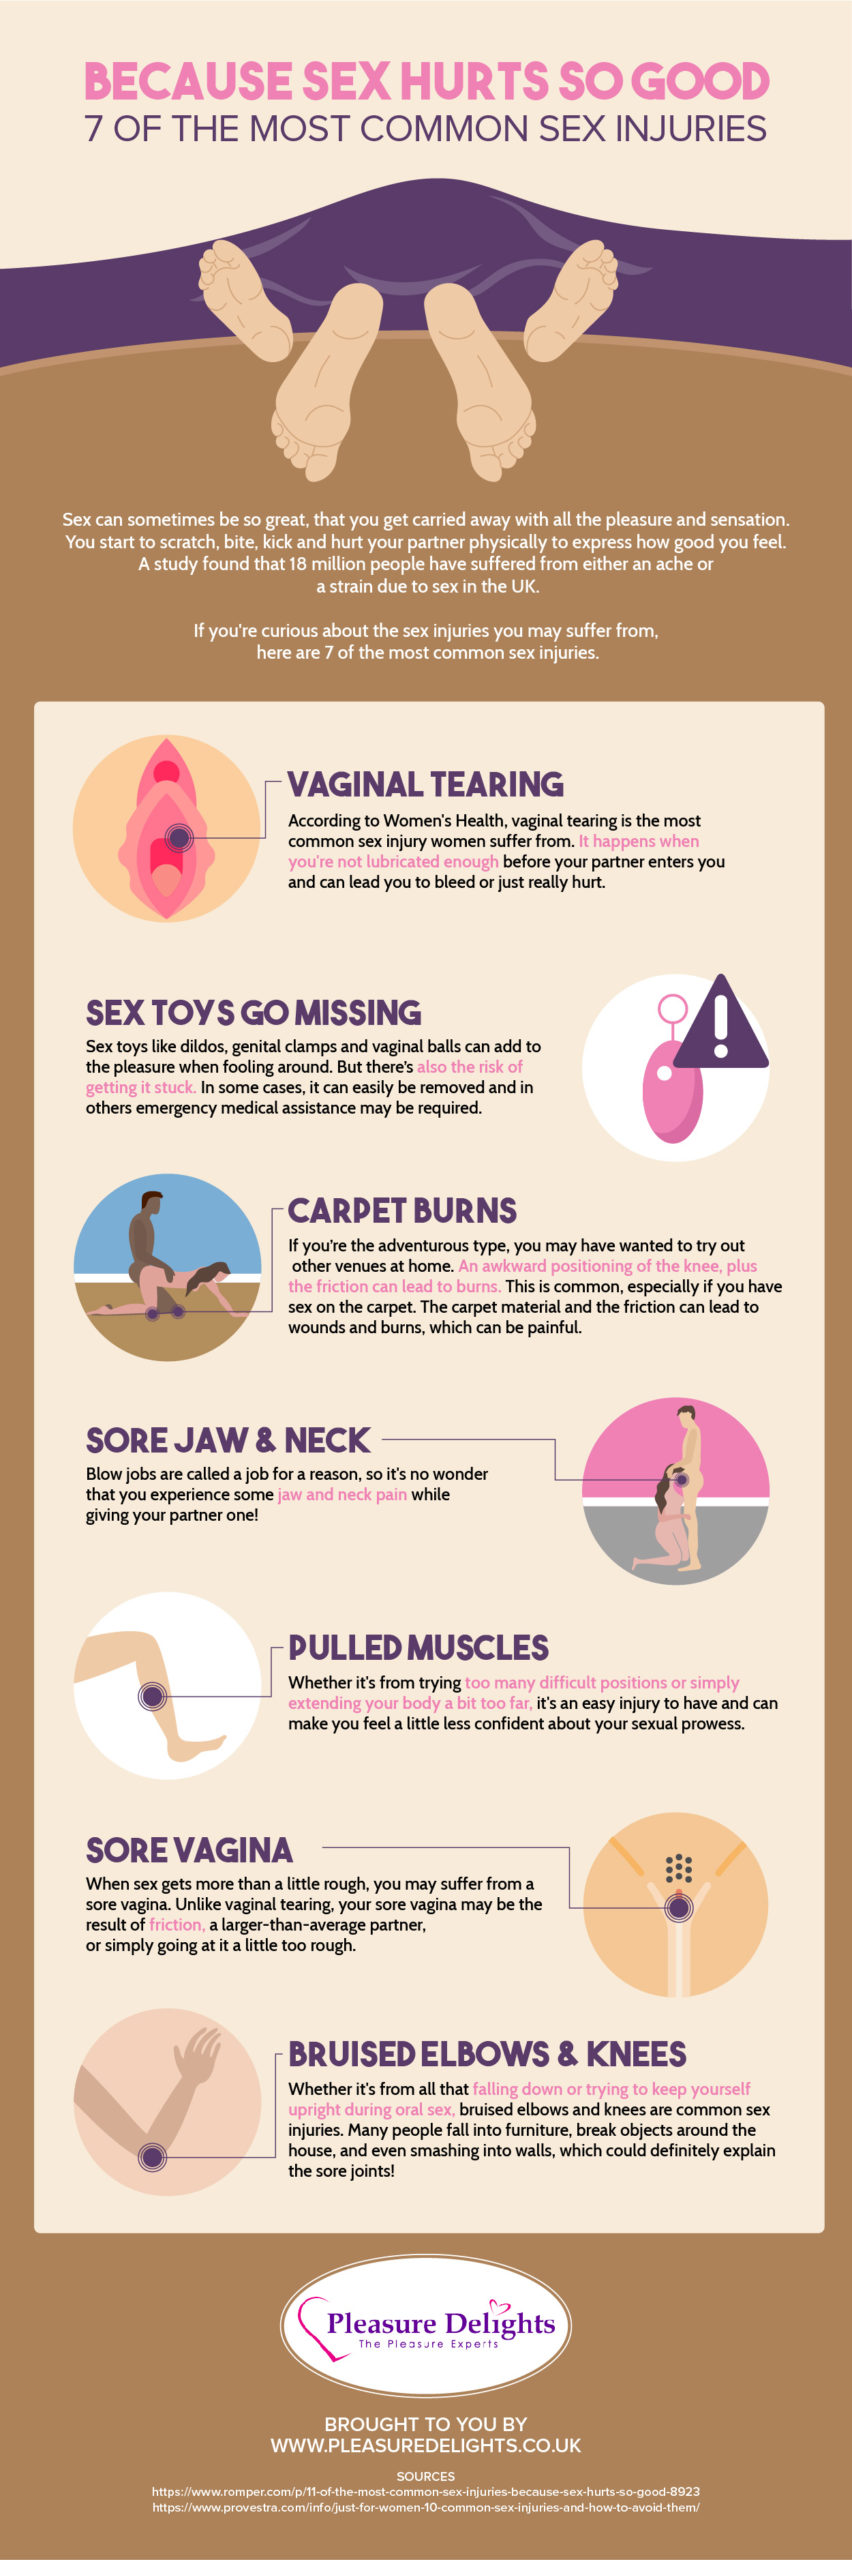 7 of the most common sex injuries